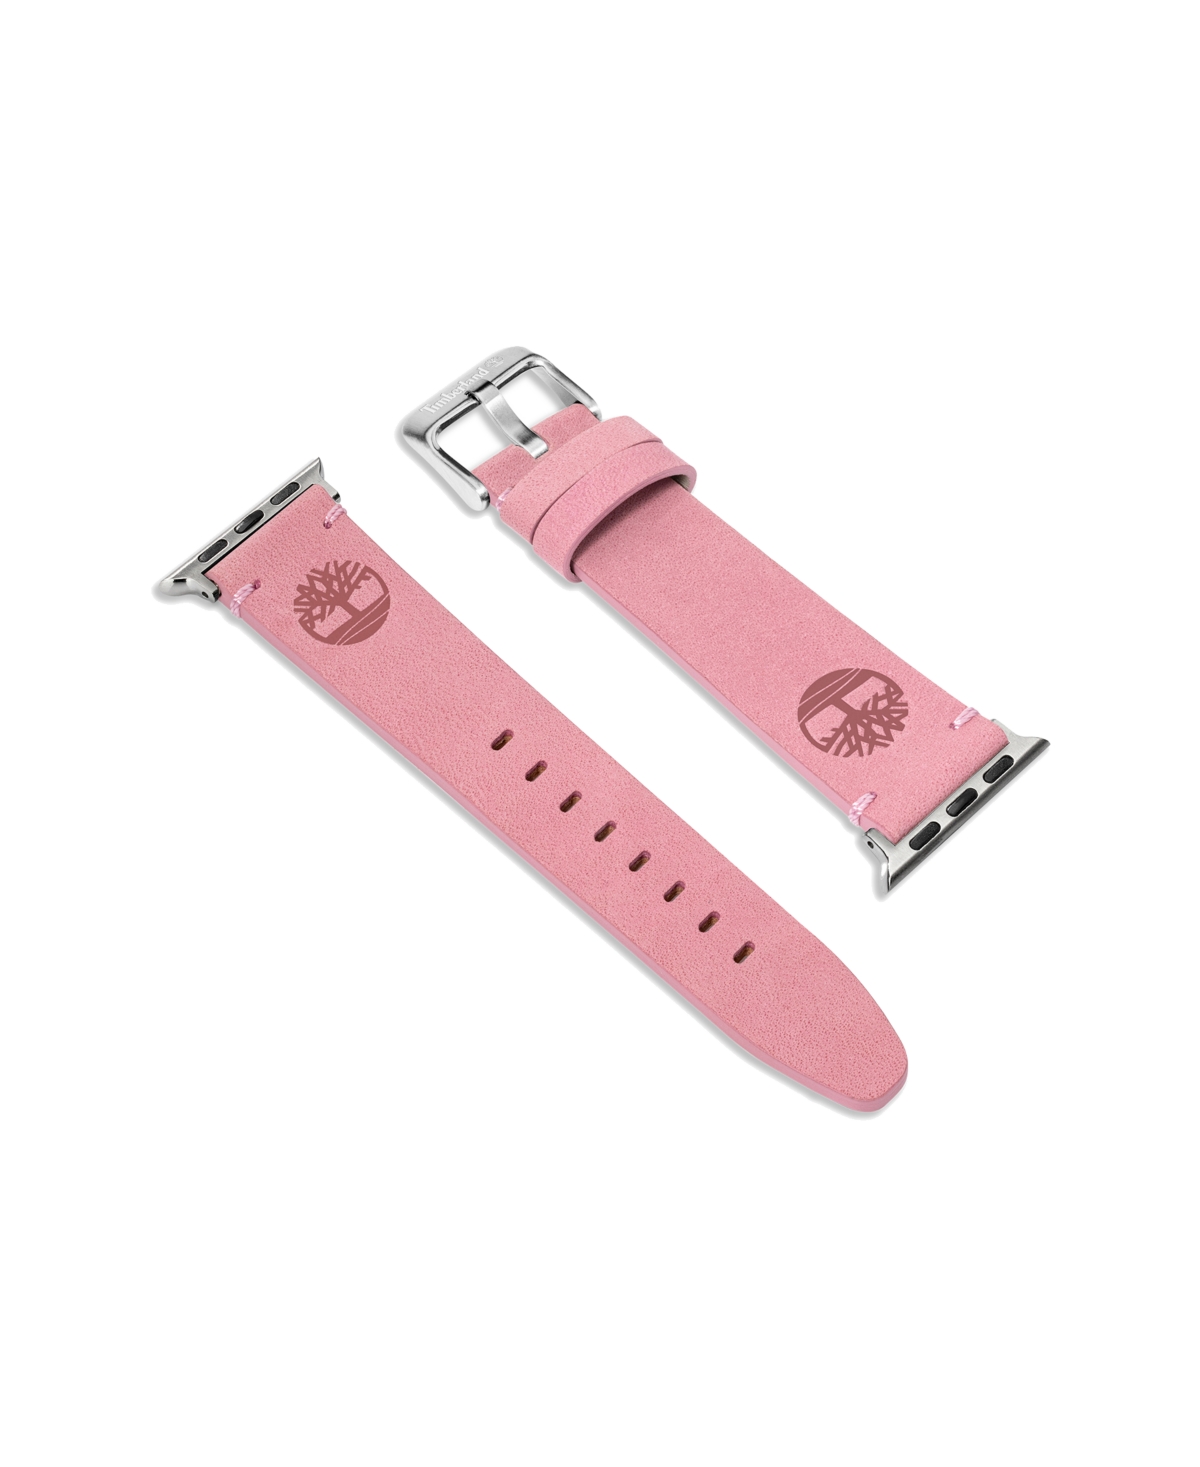 Unisex Ashby Pink Genuine Leather Universal Smart Watch Strap 20mm - Pink